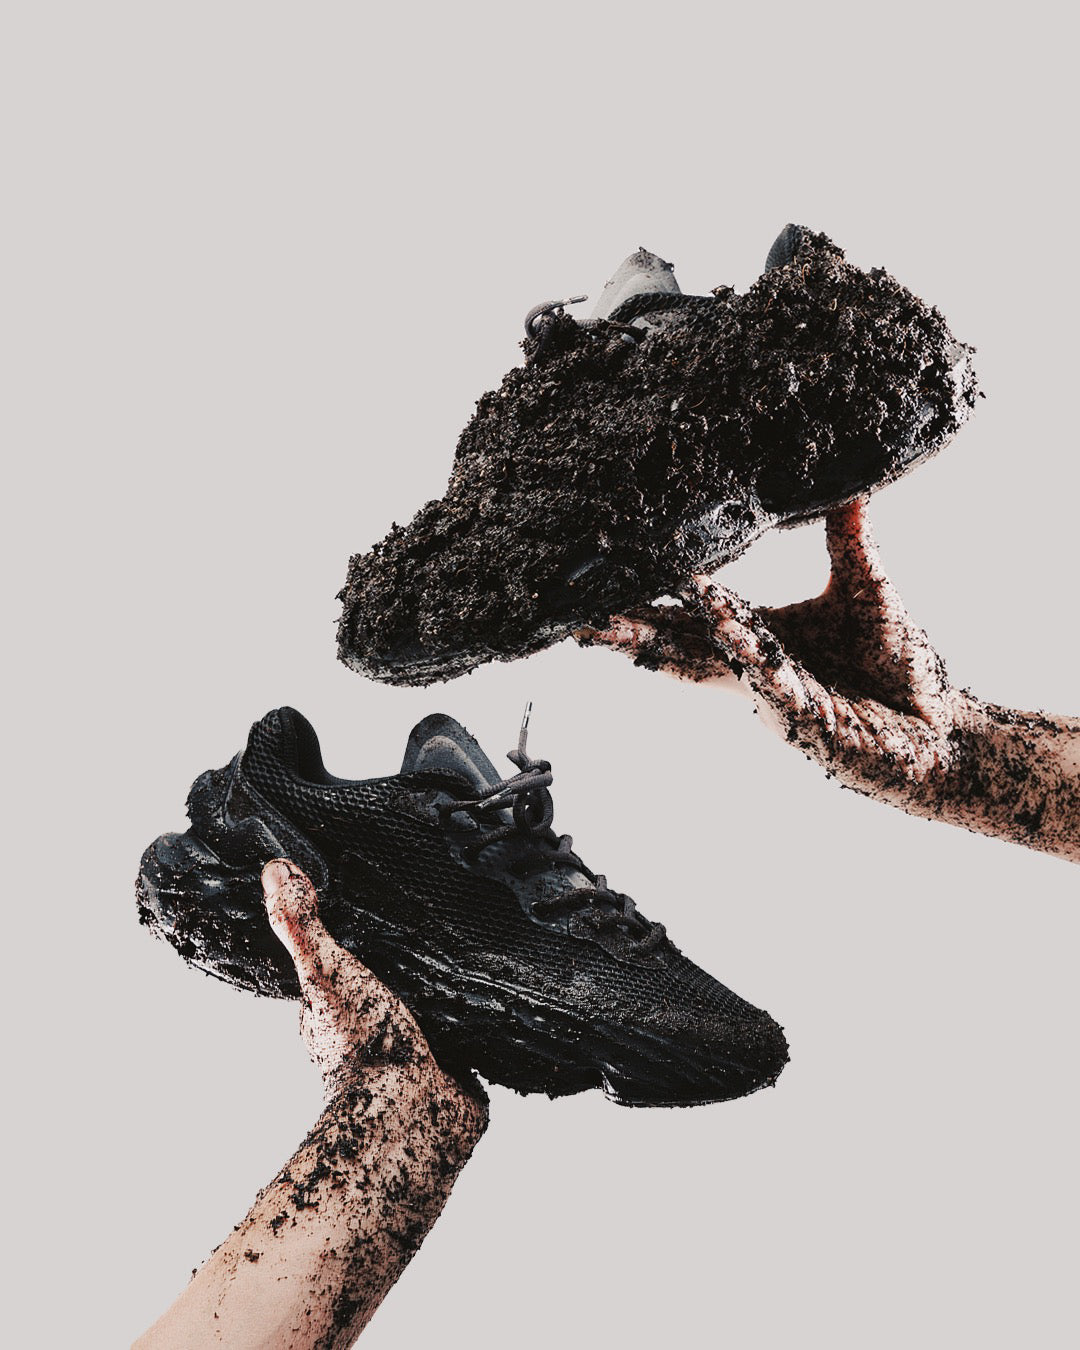 Flowers for Society Sneaker Seed.One Black Mud black medial and lateral view held by hands covered in earth